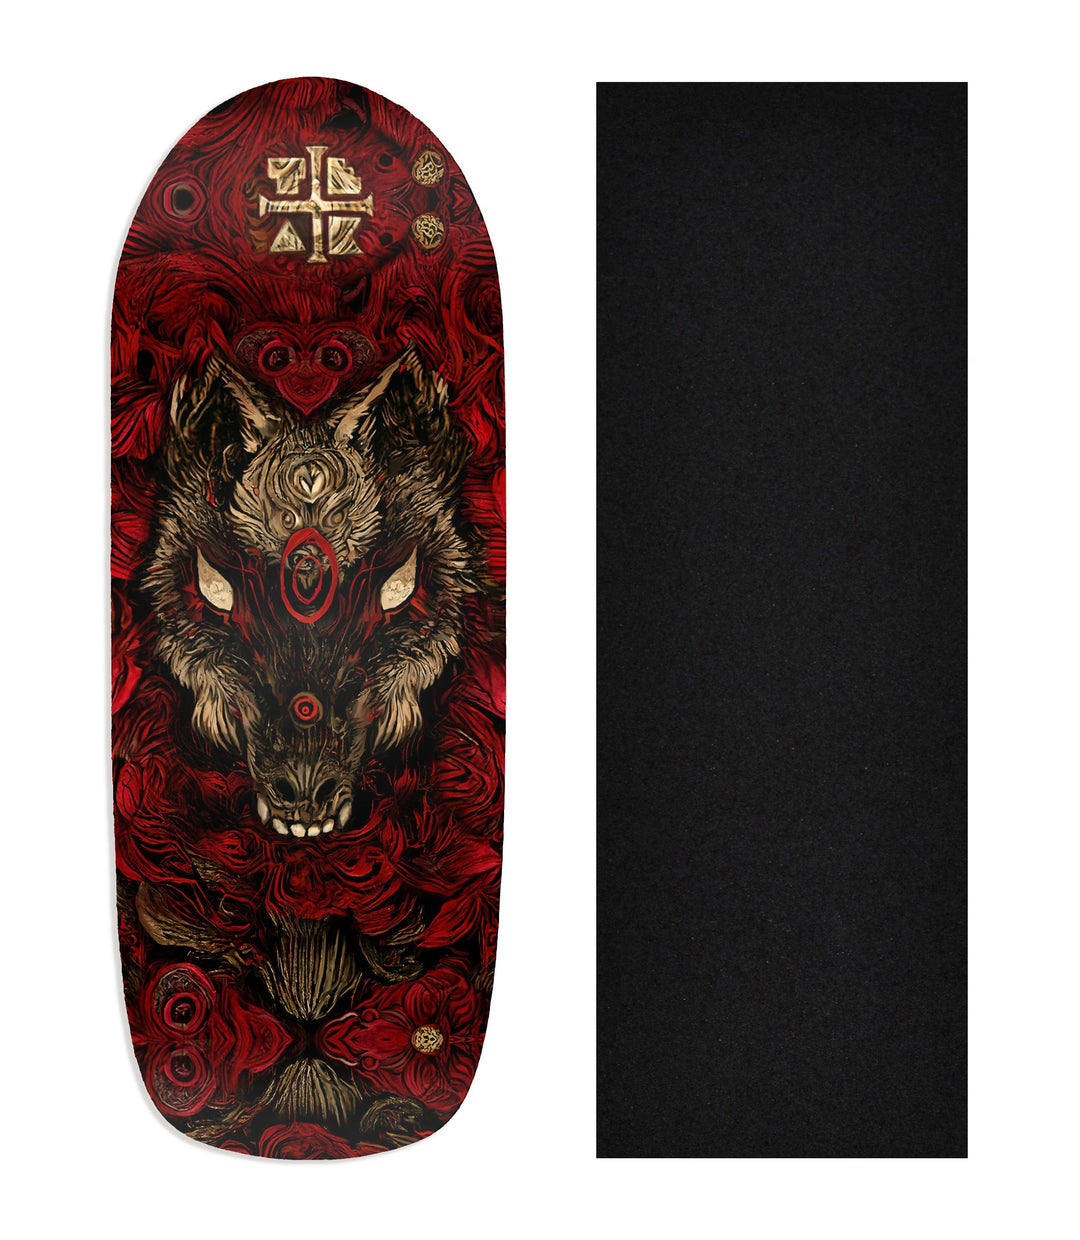 Teak Tuning Heat Transfer Graphic Wooden Fingerboard Deck, "Howl in the Night" Poolparty Deck